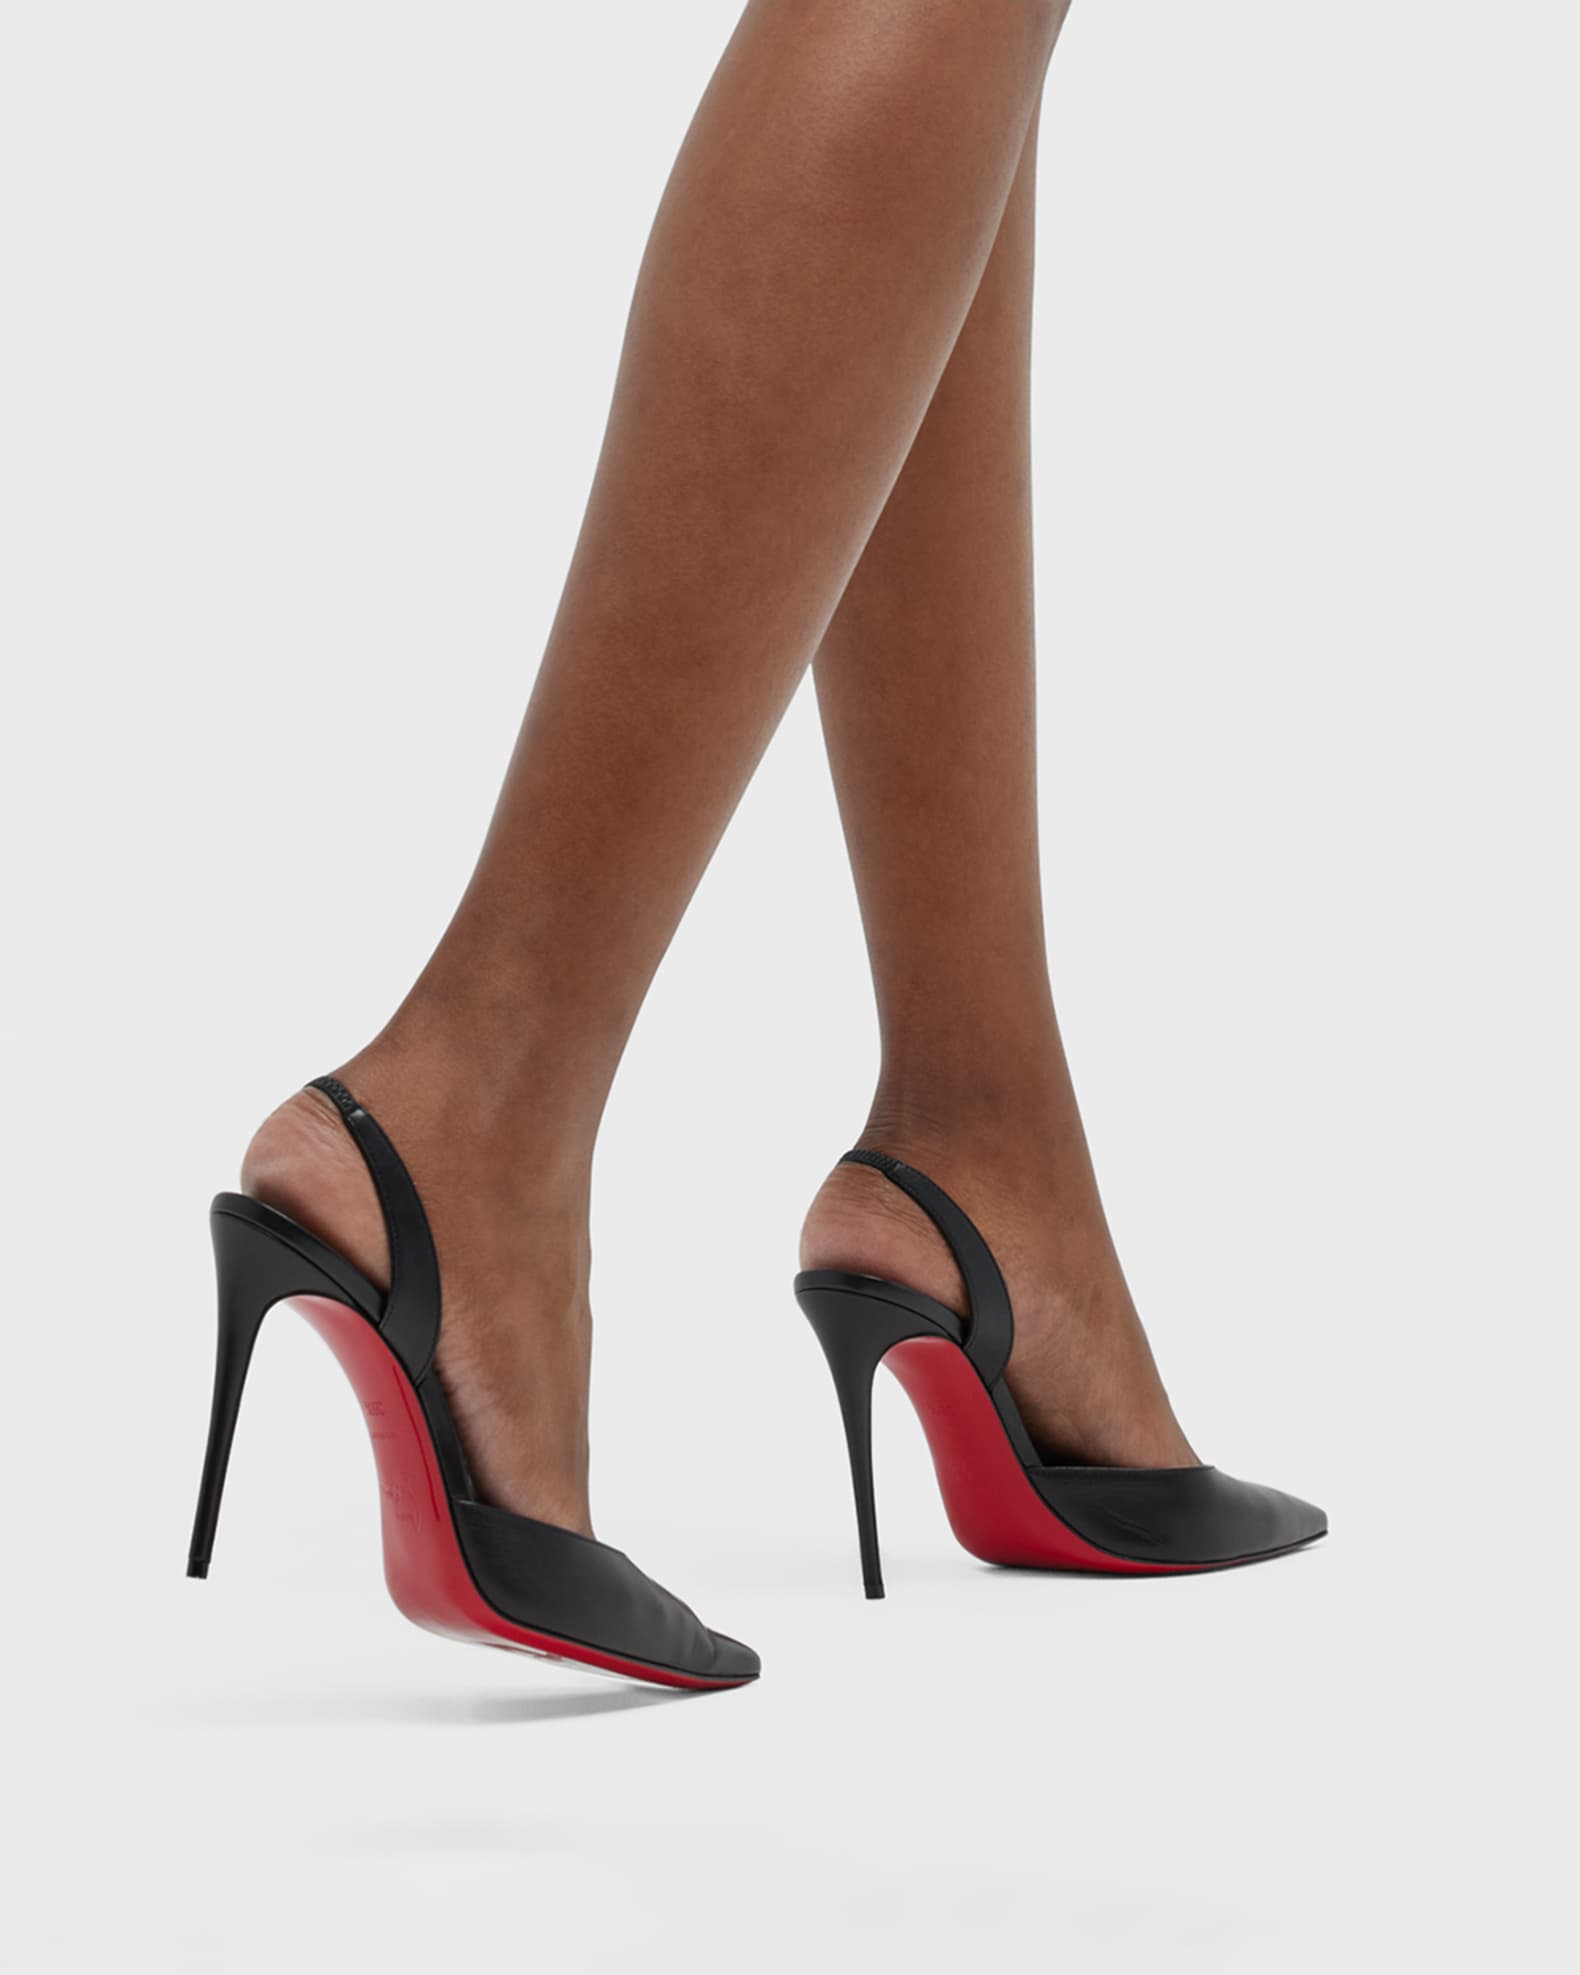 CHRISTIAN LOUBOUTIN Kate 100 suede pumps